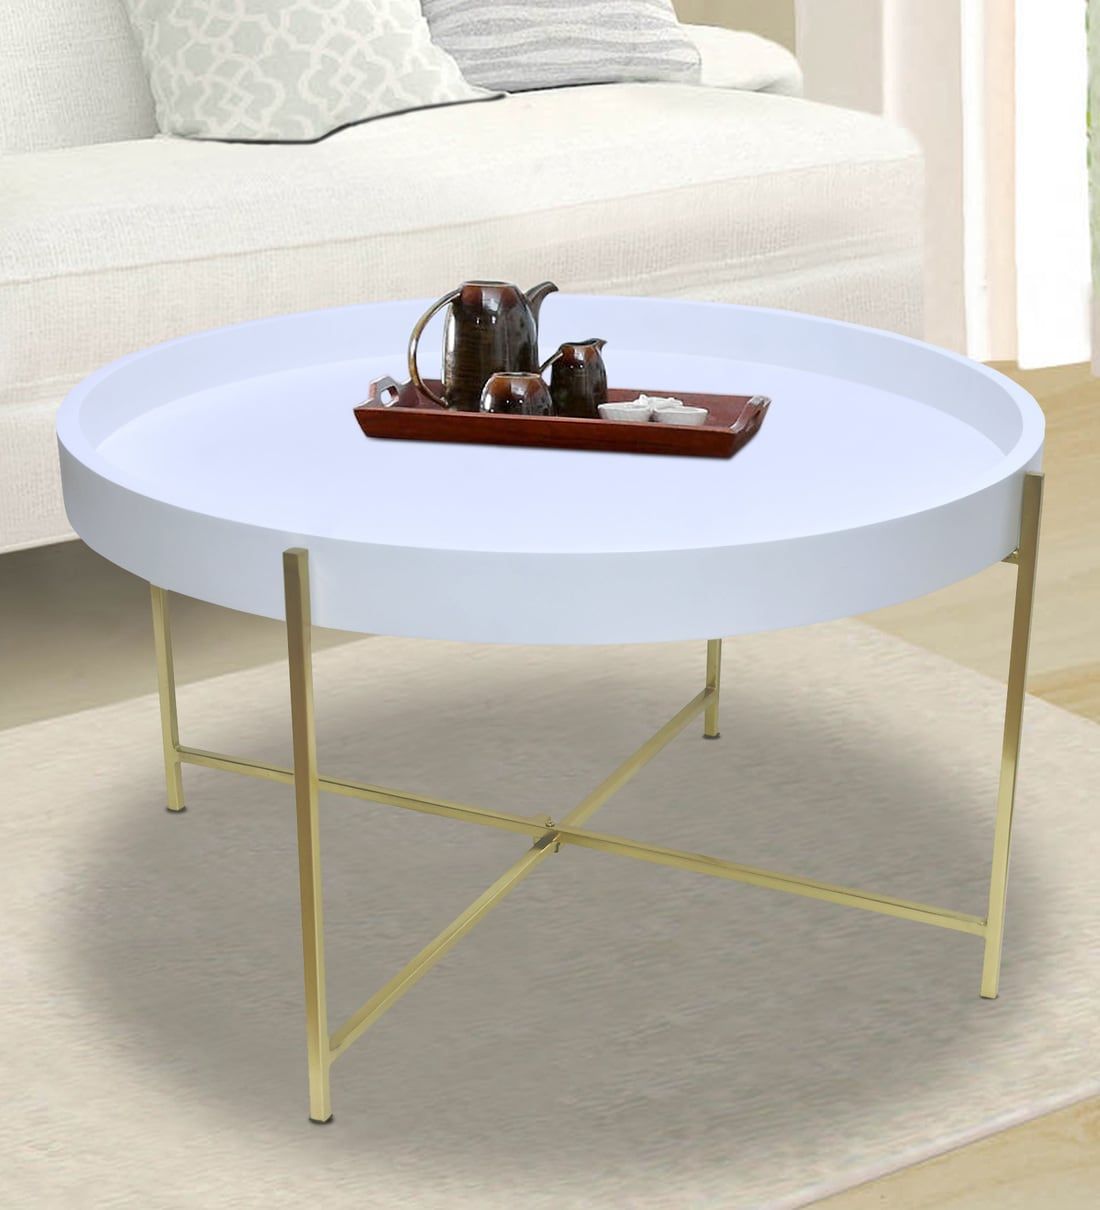 Buy Elizabeth Coffee Table In Glossy White & Gold Finish At 22% Off Strawberry Collective | Pepperfry With Regard To Glossy Finished Metal Coffee Tables (View 8 of 15)